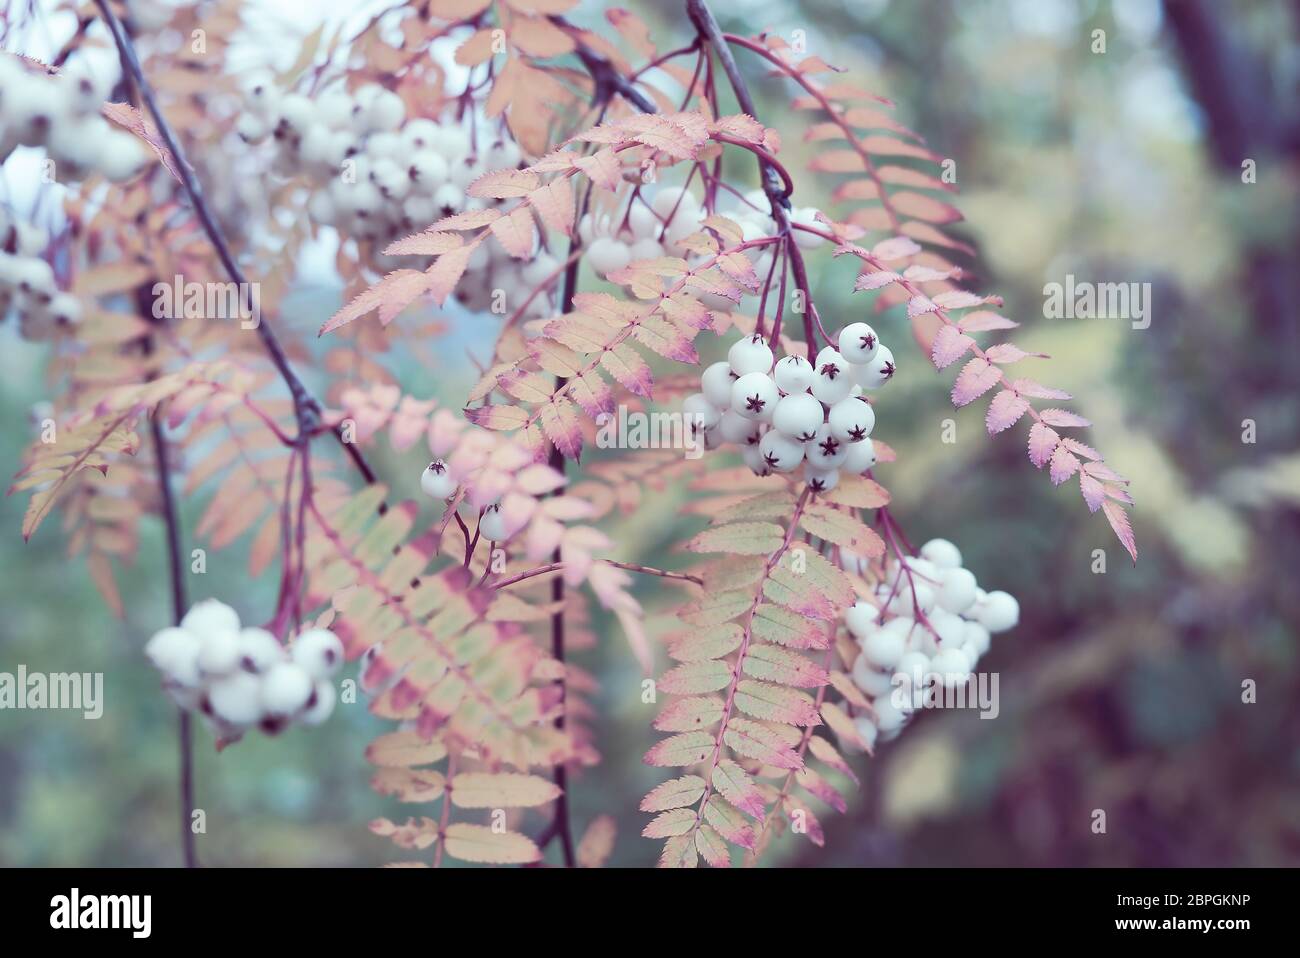 Autumnal detail of a wild Chinese Rowan tree branch with mountain ash leaves and white sorbus berries in a feminine soft pink color tone. Stock Photo